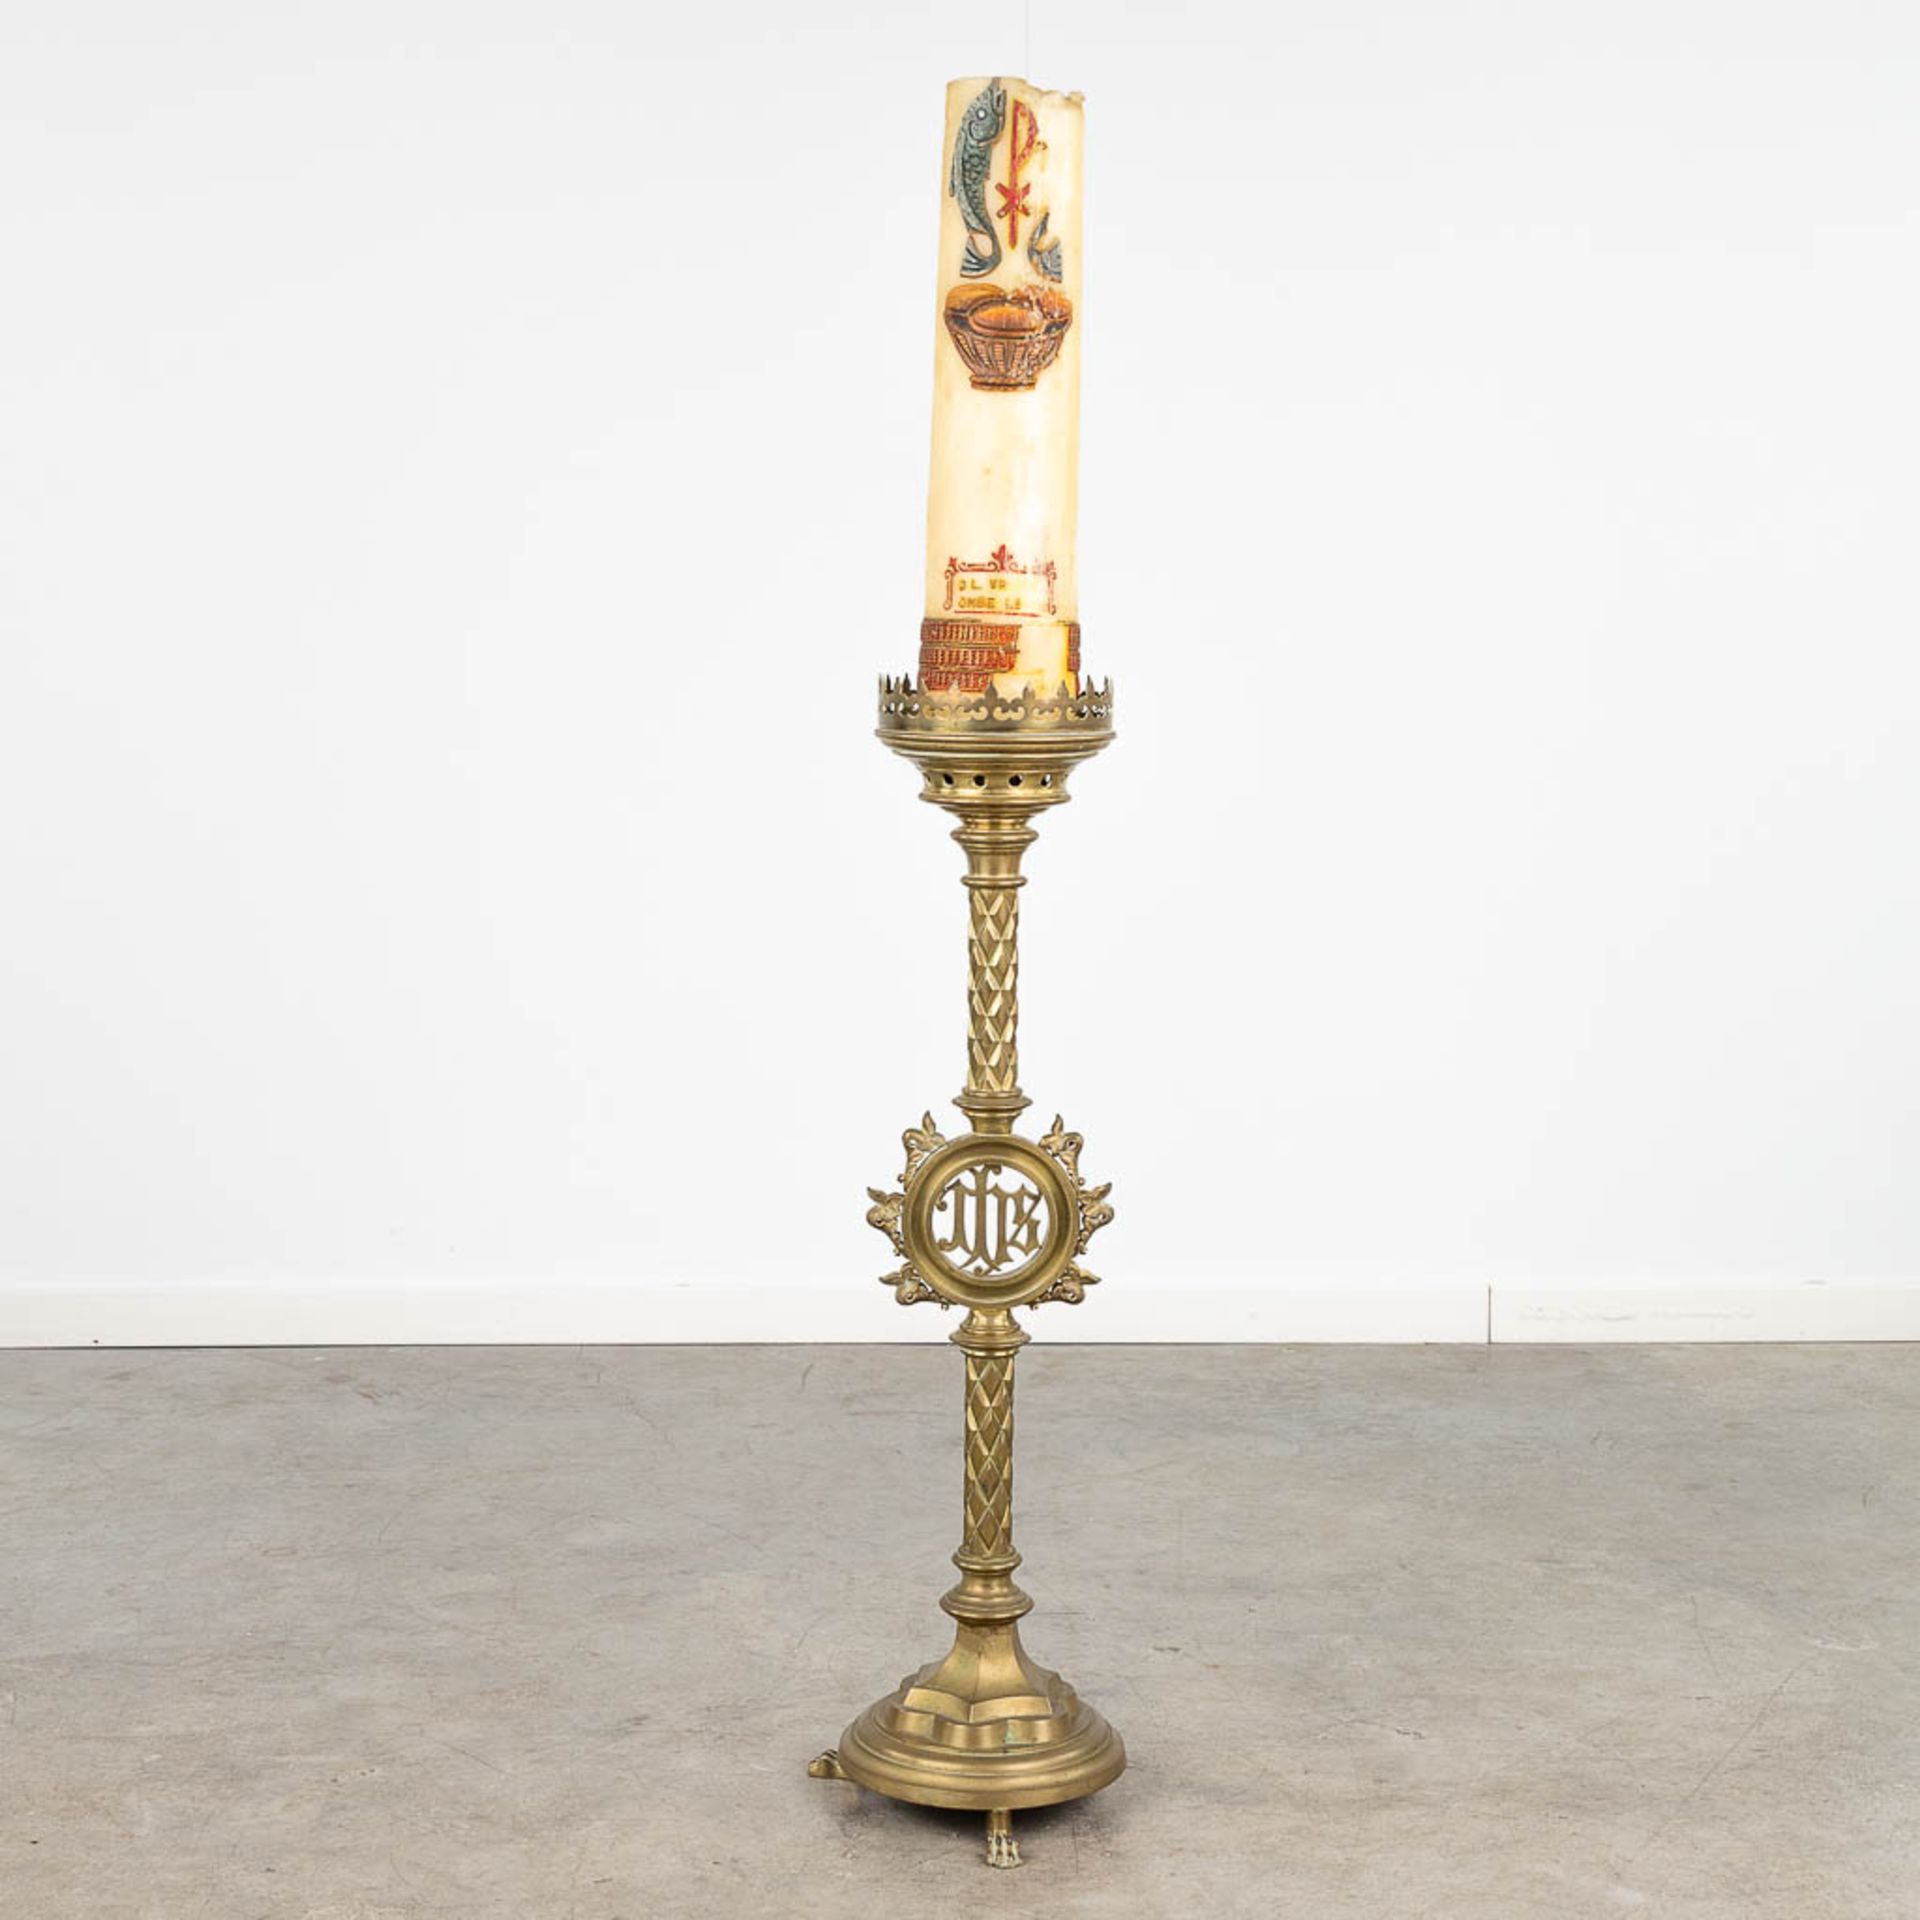 A large candlestick made of bronze, decorated with IHS logo. Gothic Revival style. (H: 92 cm)